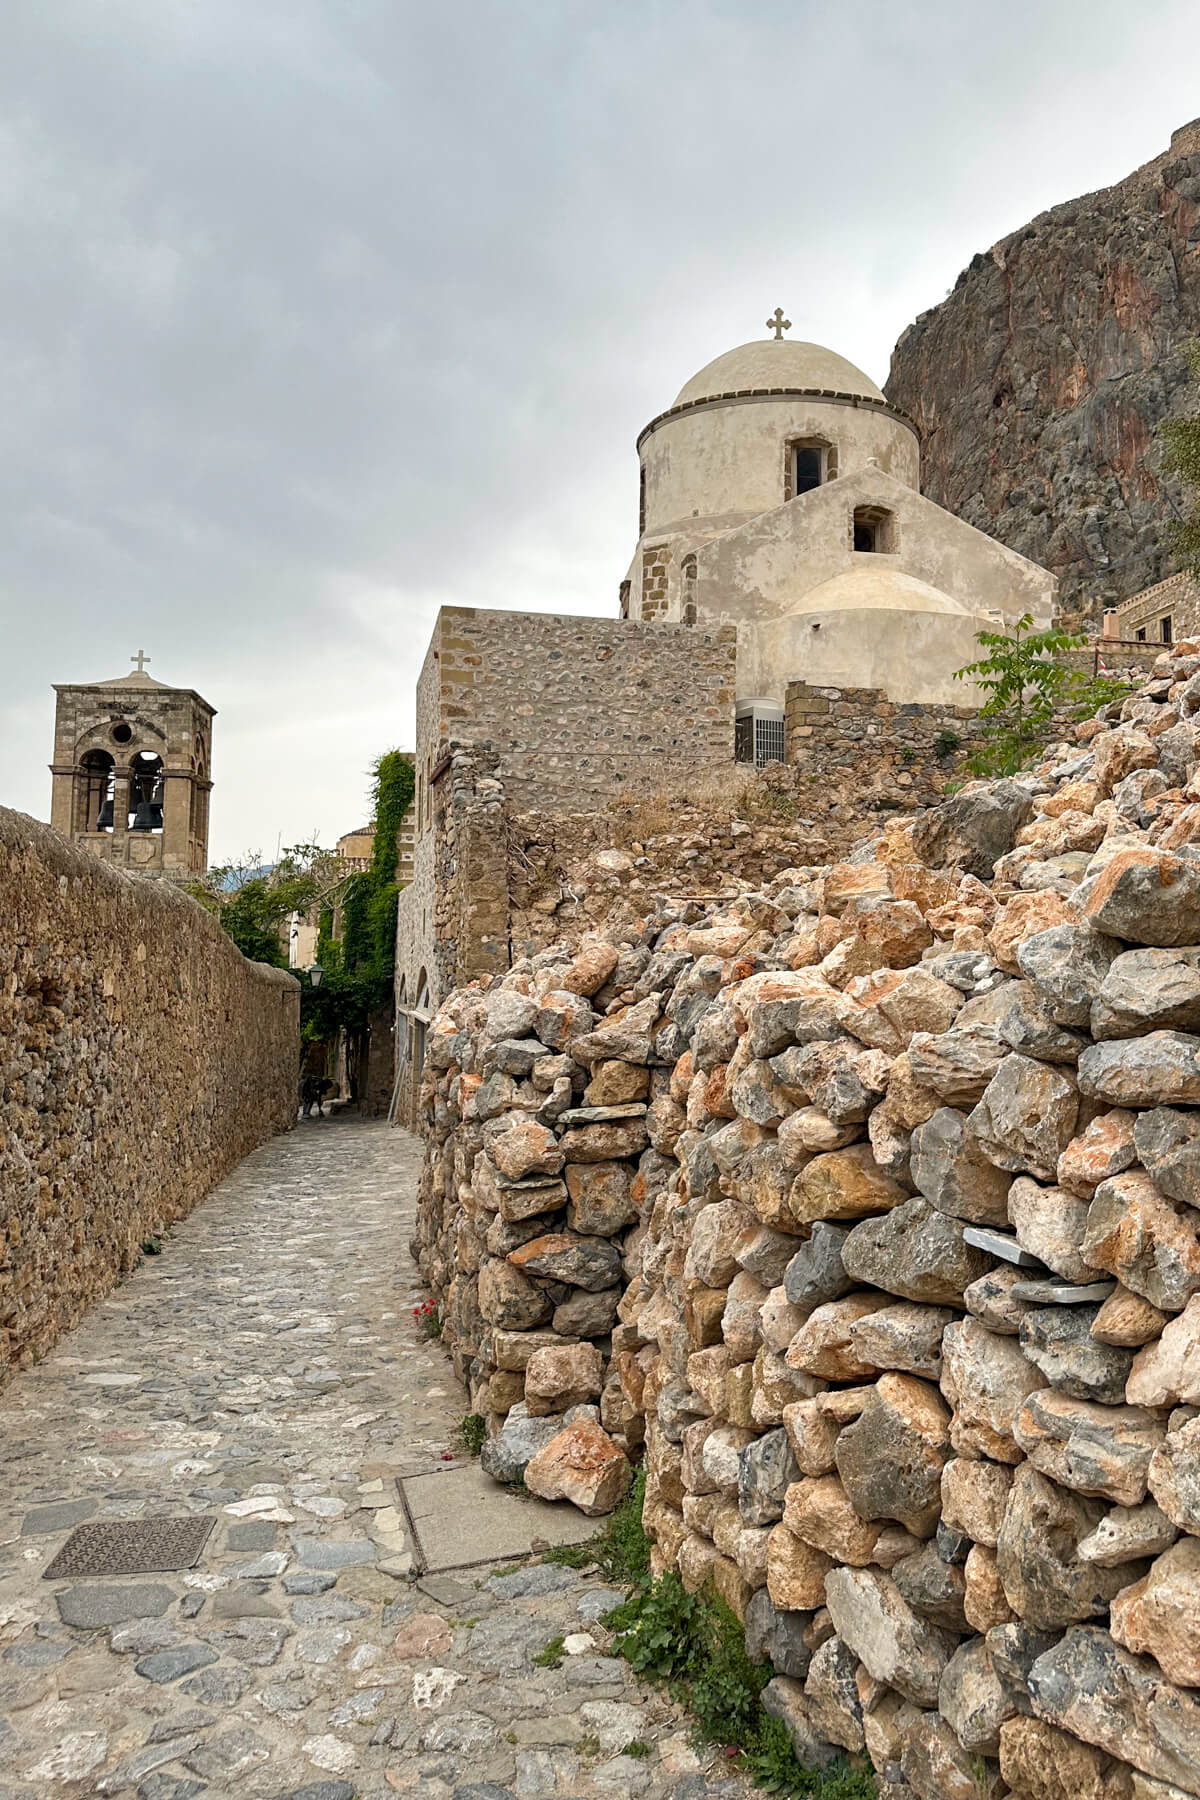 A view going up the hill to the upper section of Monemvasia